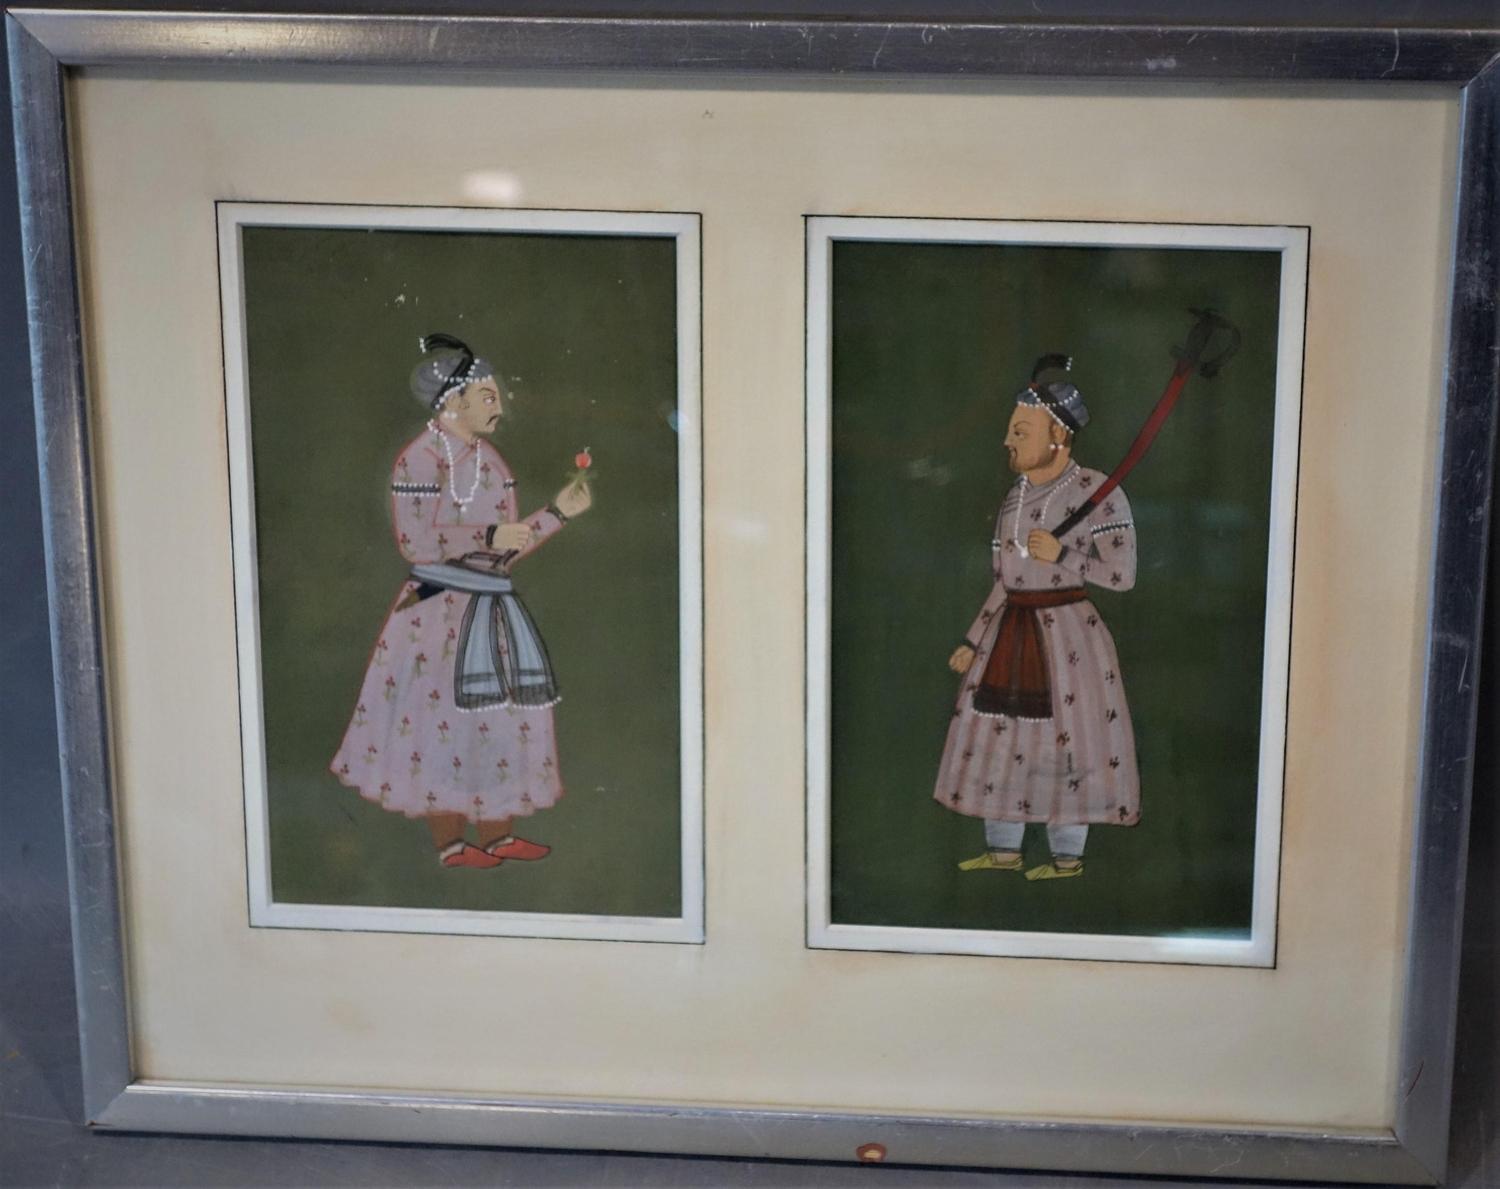 Two Mughal illuminations representing two nobleman or soldiers, framed and glazed, 38 x 31 cm